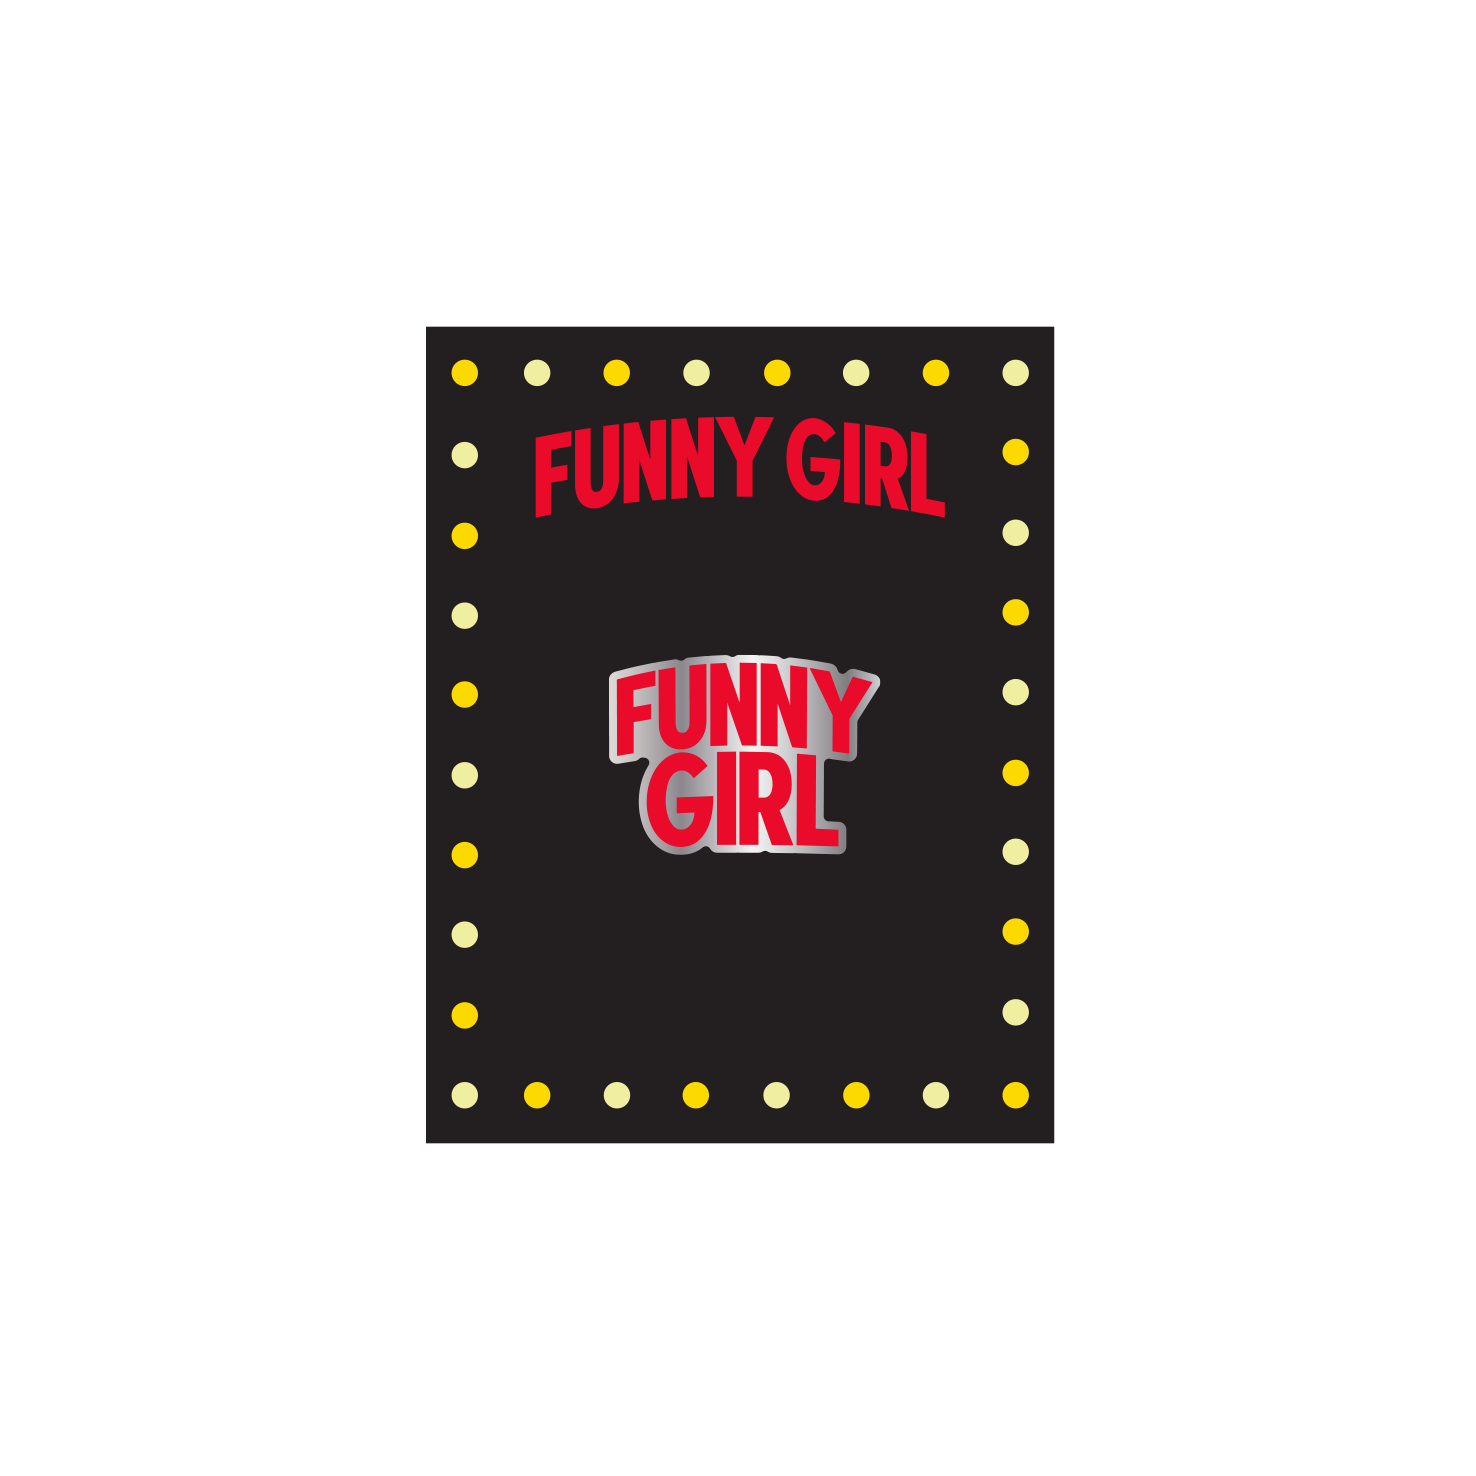 FUNNY GIRL Title Lapel Pin – Broadway Merchandise Shop by Creative Goods